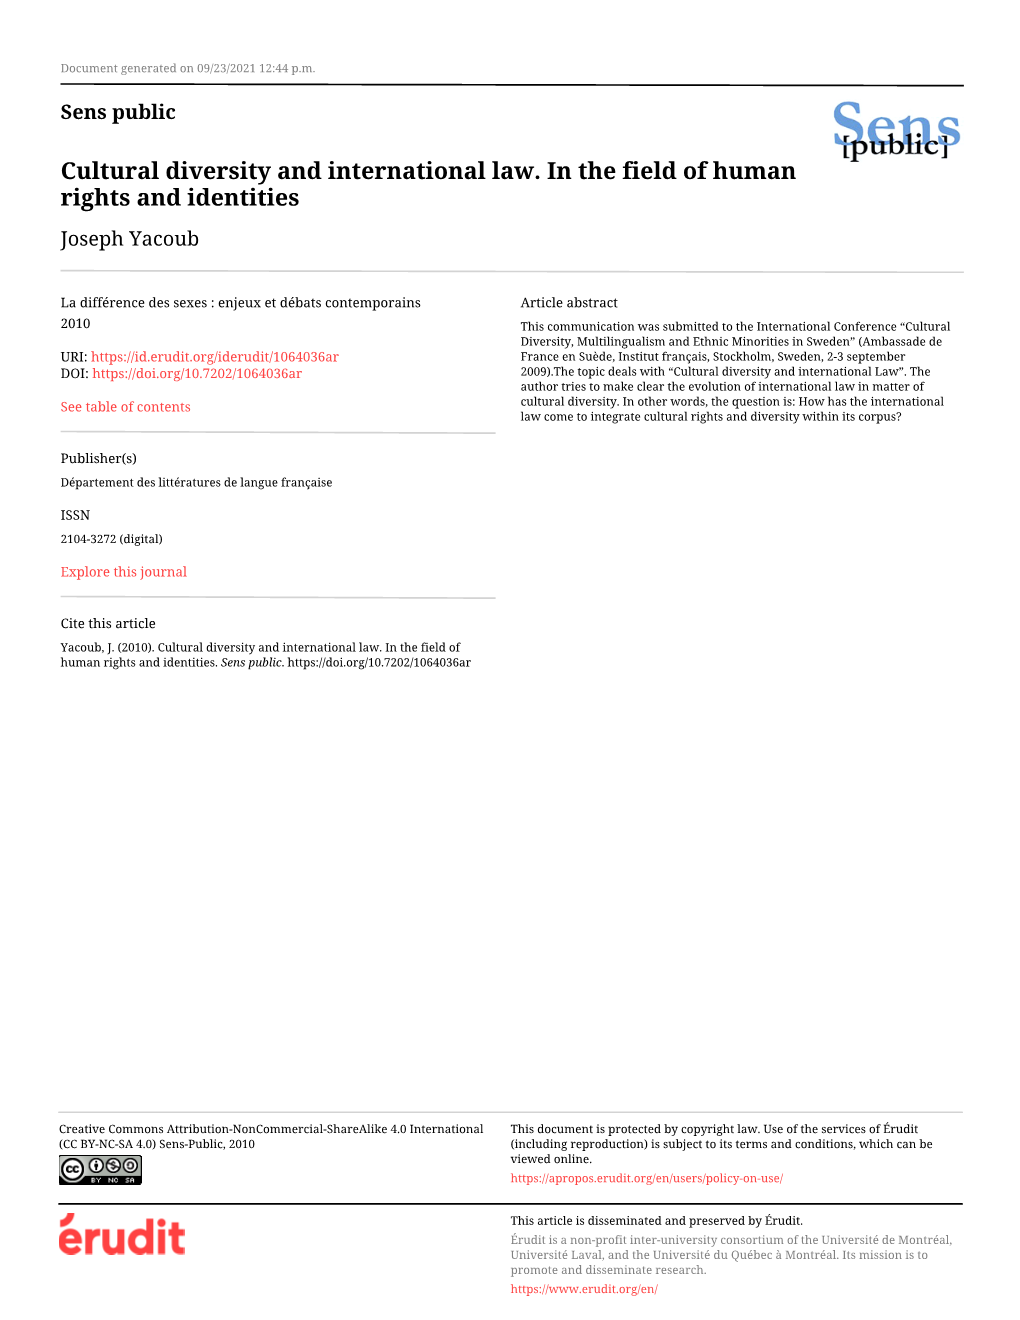 Cultural Diversity and International Law. in the Field of Human Rights and Identities Joseph Yacoub